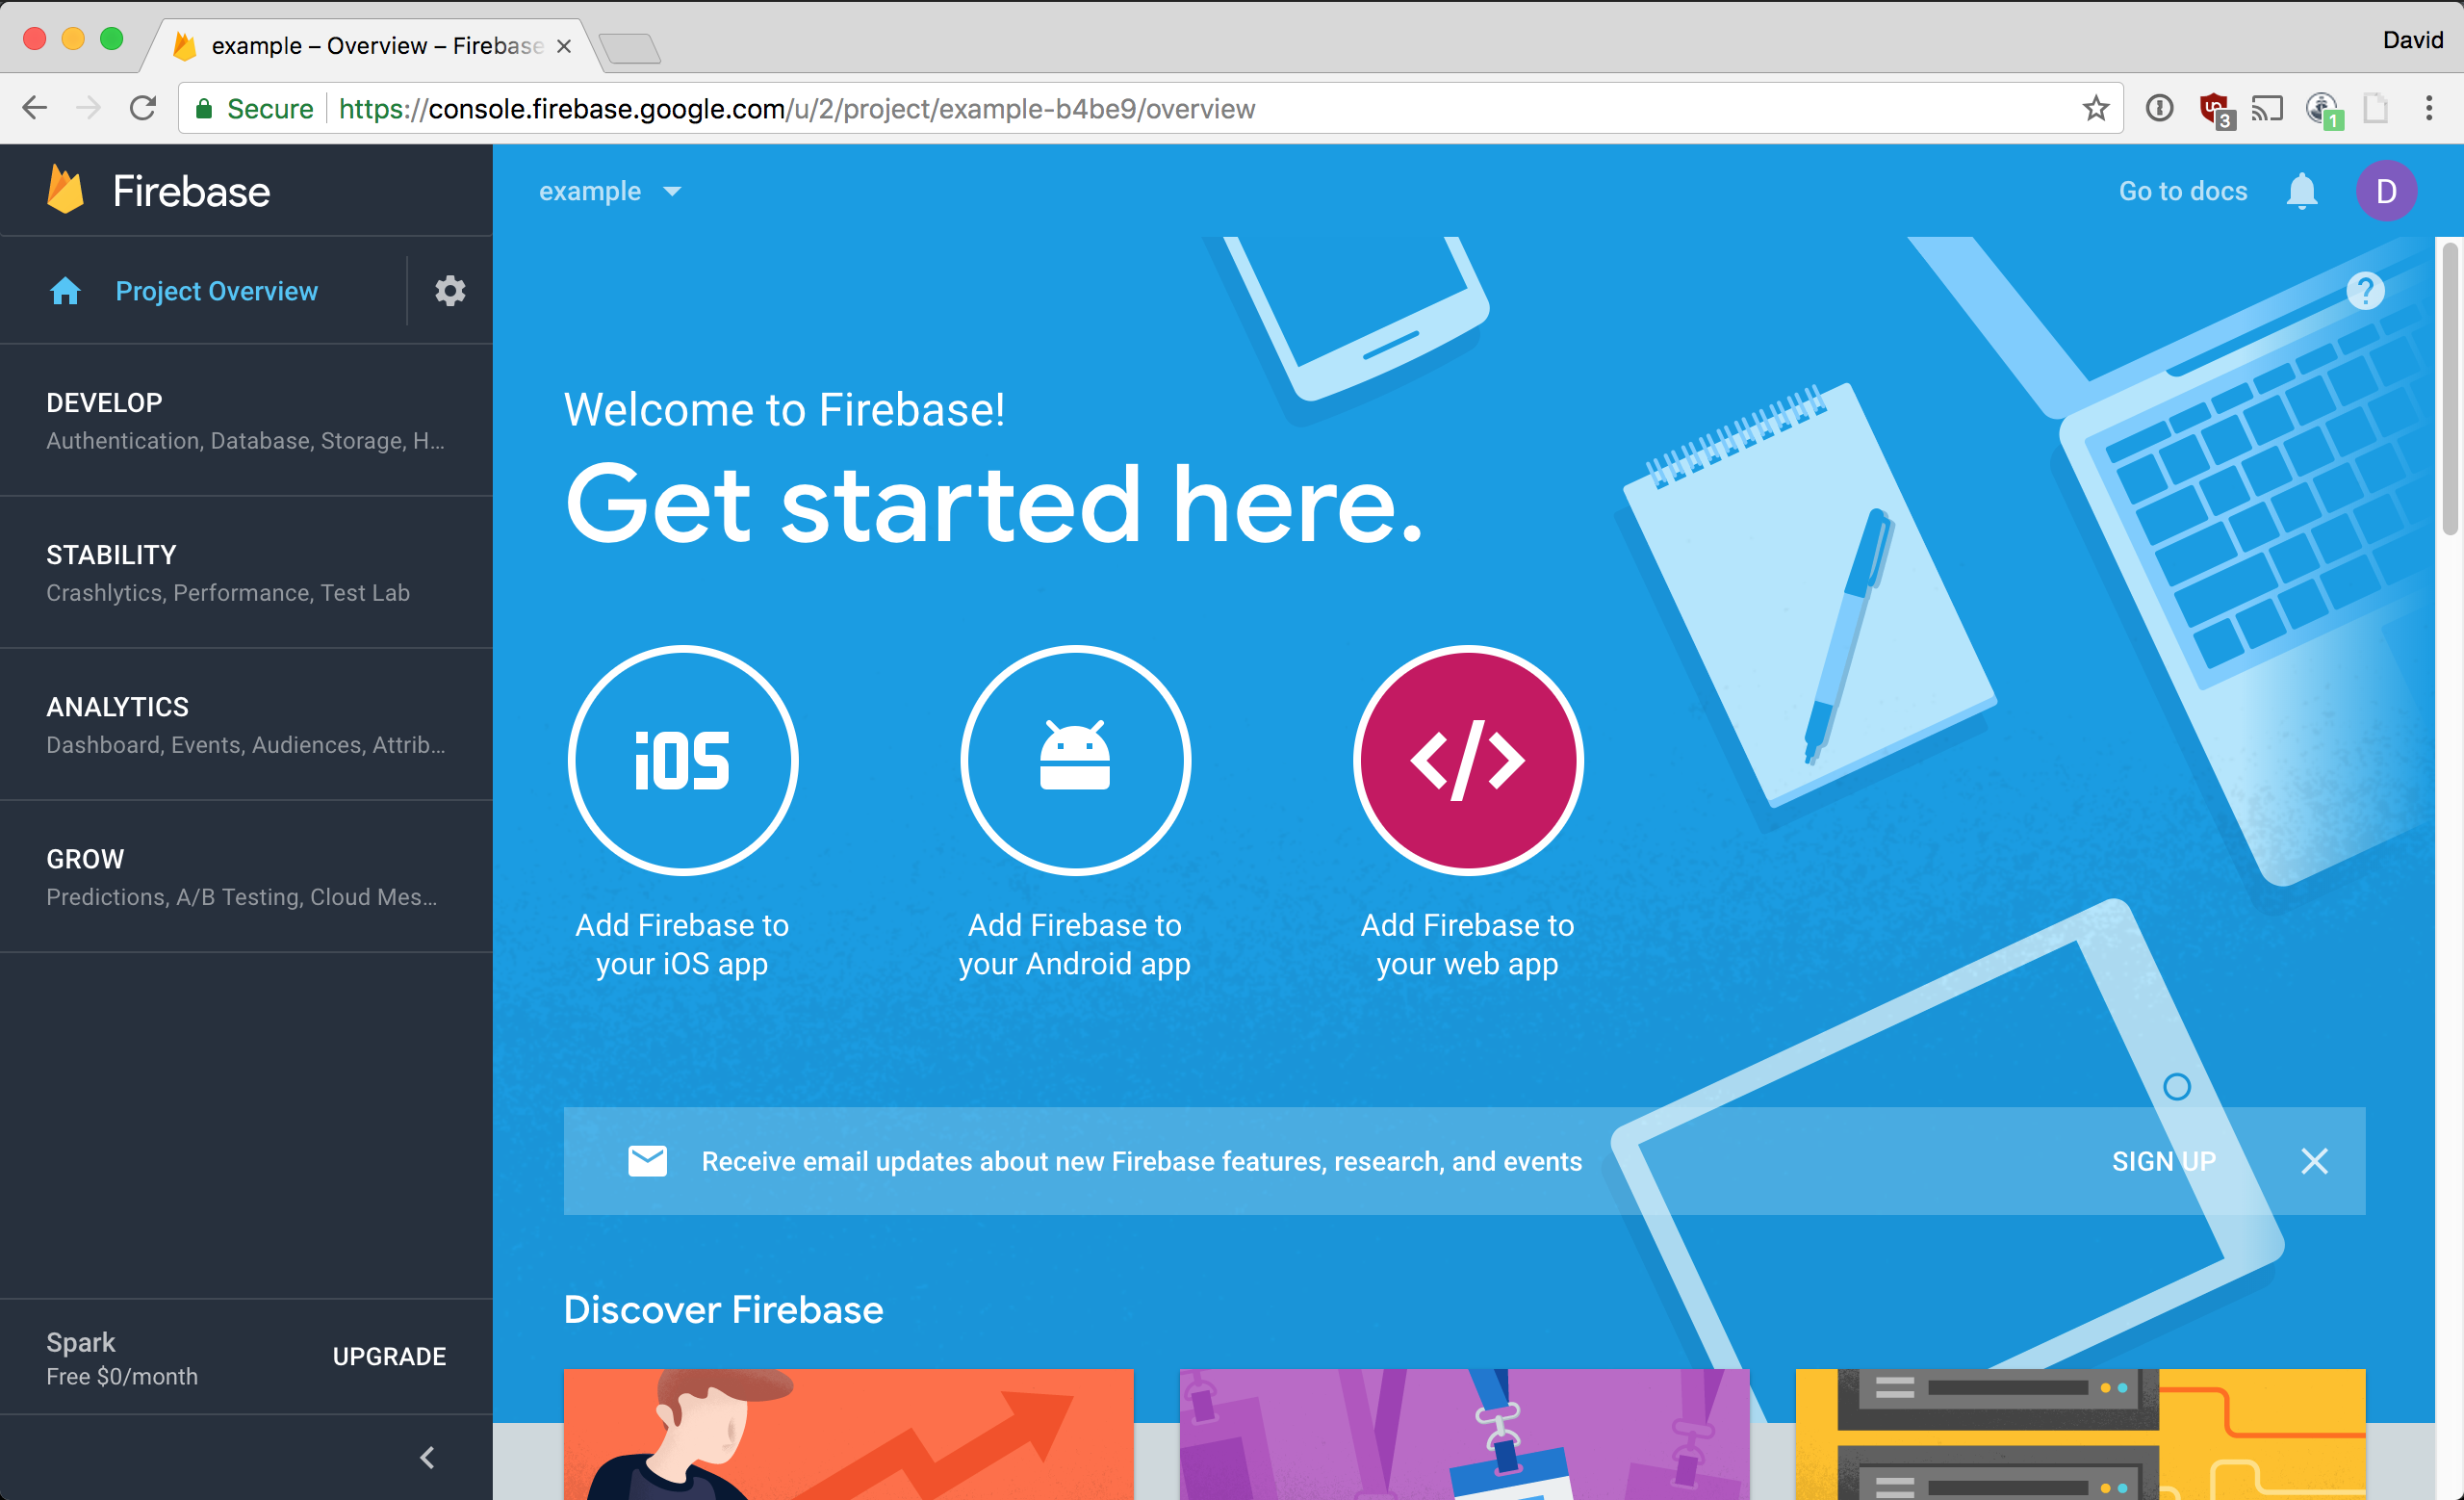 Click Add Firebase to your web app